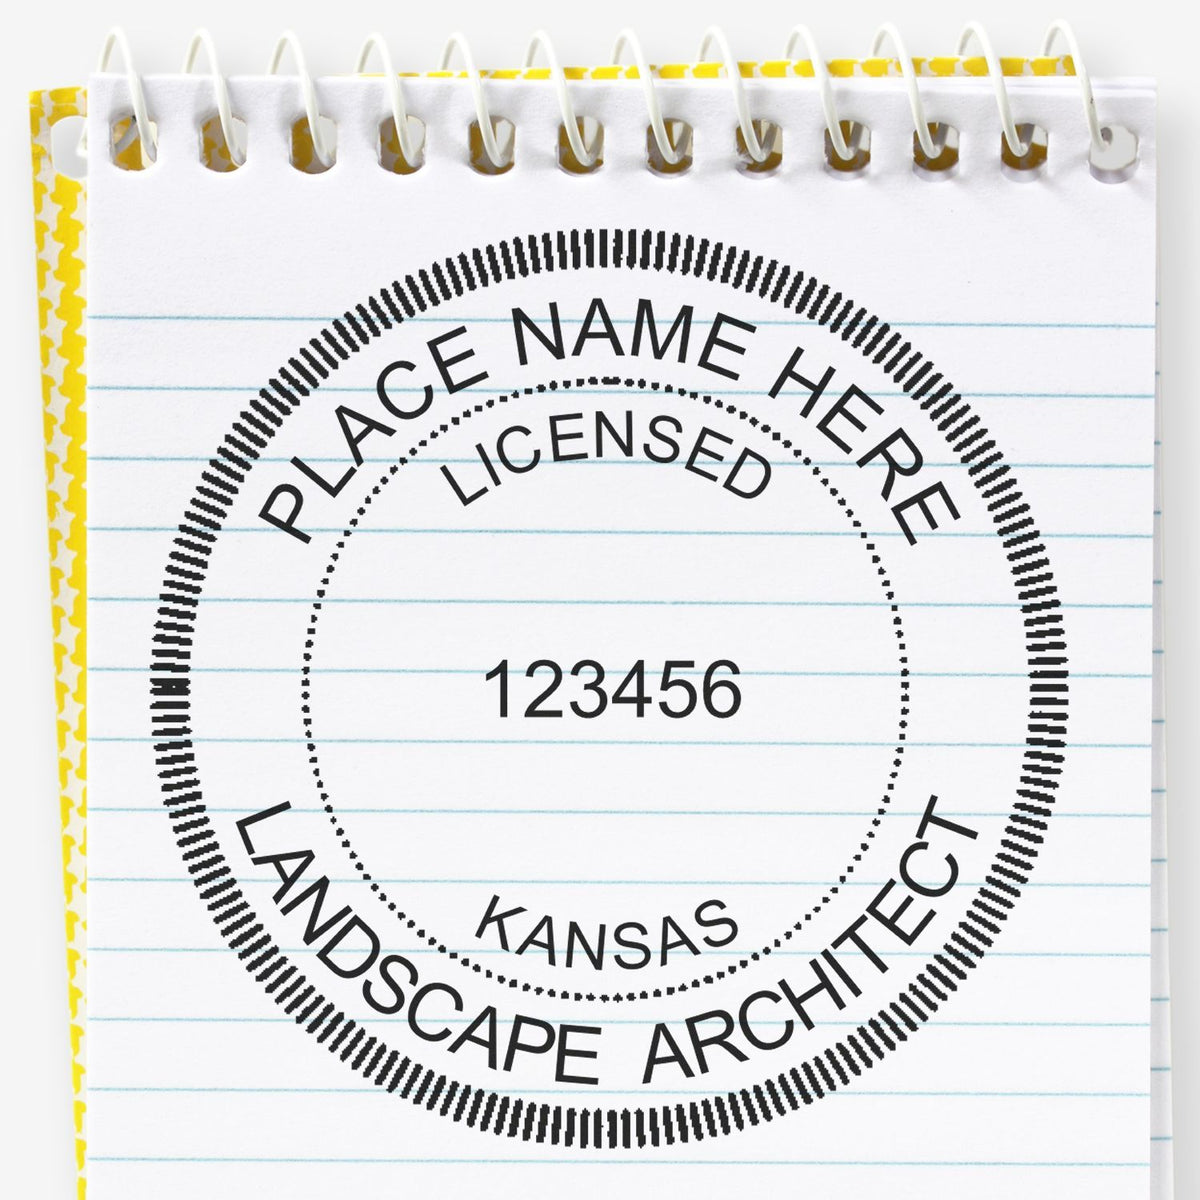 This paper is stamped with a sample imprint of the Premium MaxLight Pre-Inked Kansas Landscape Architectural Stamp, signifying its quality and reliability.